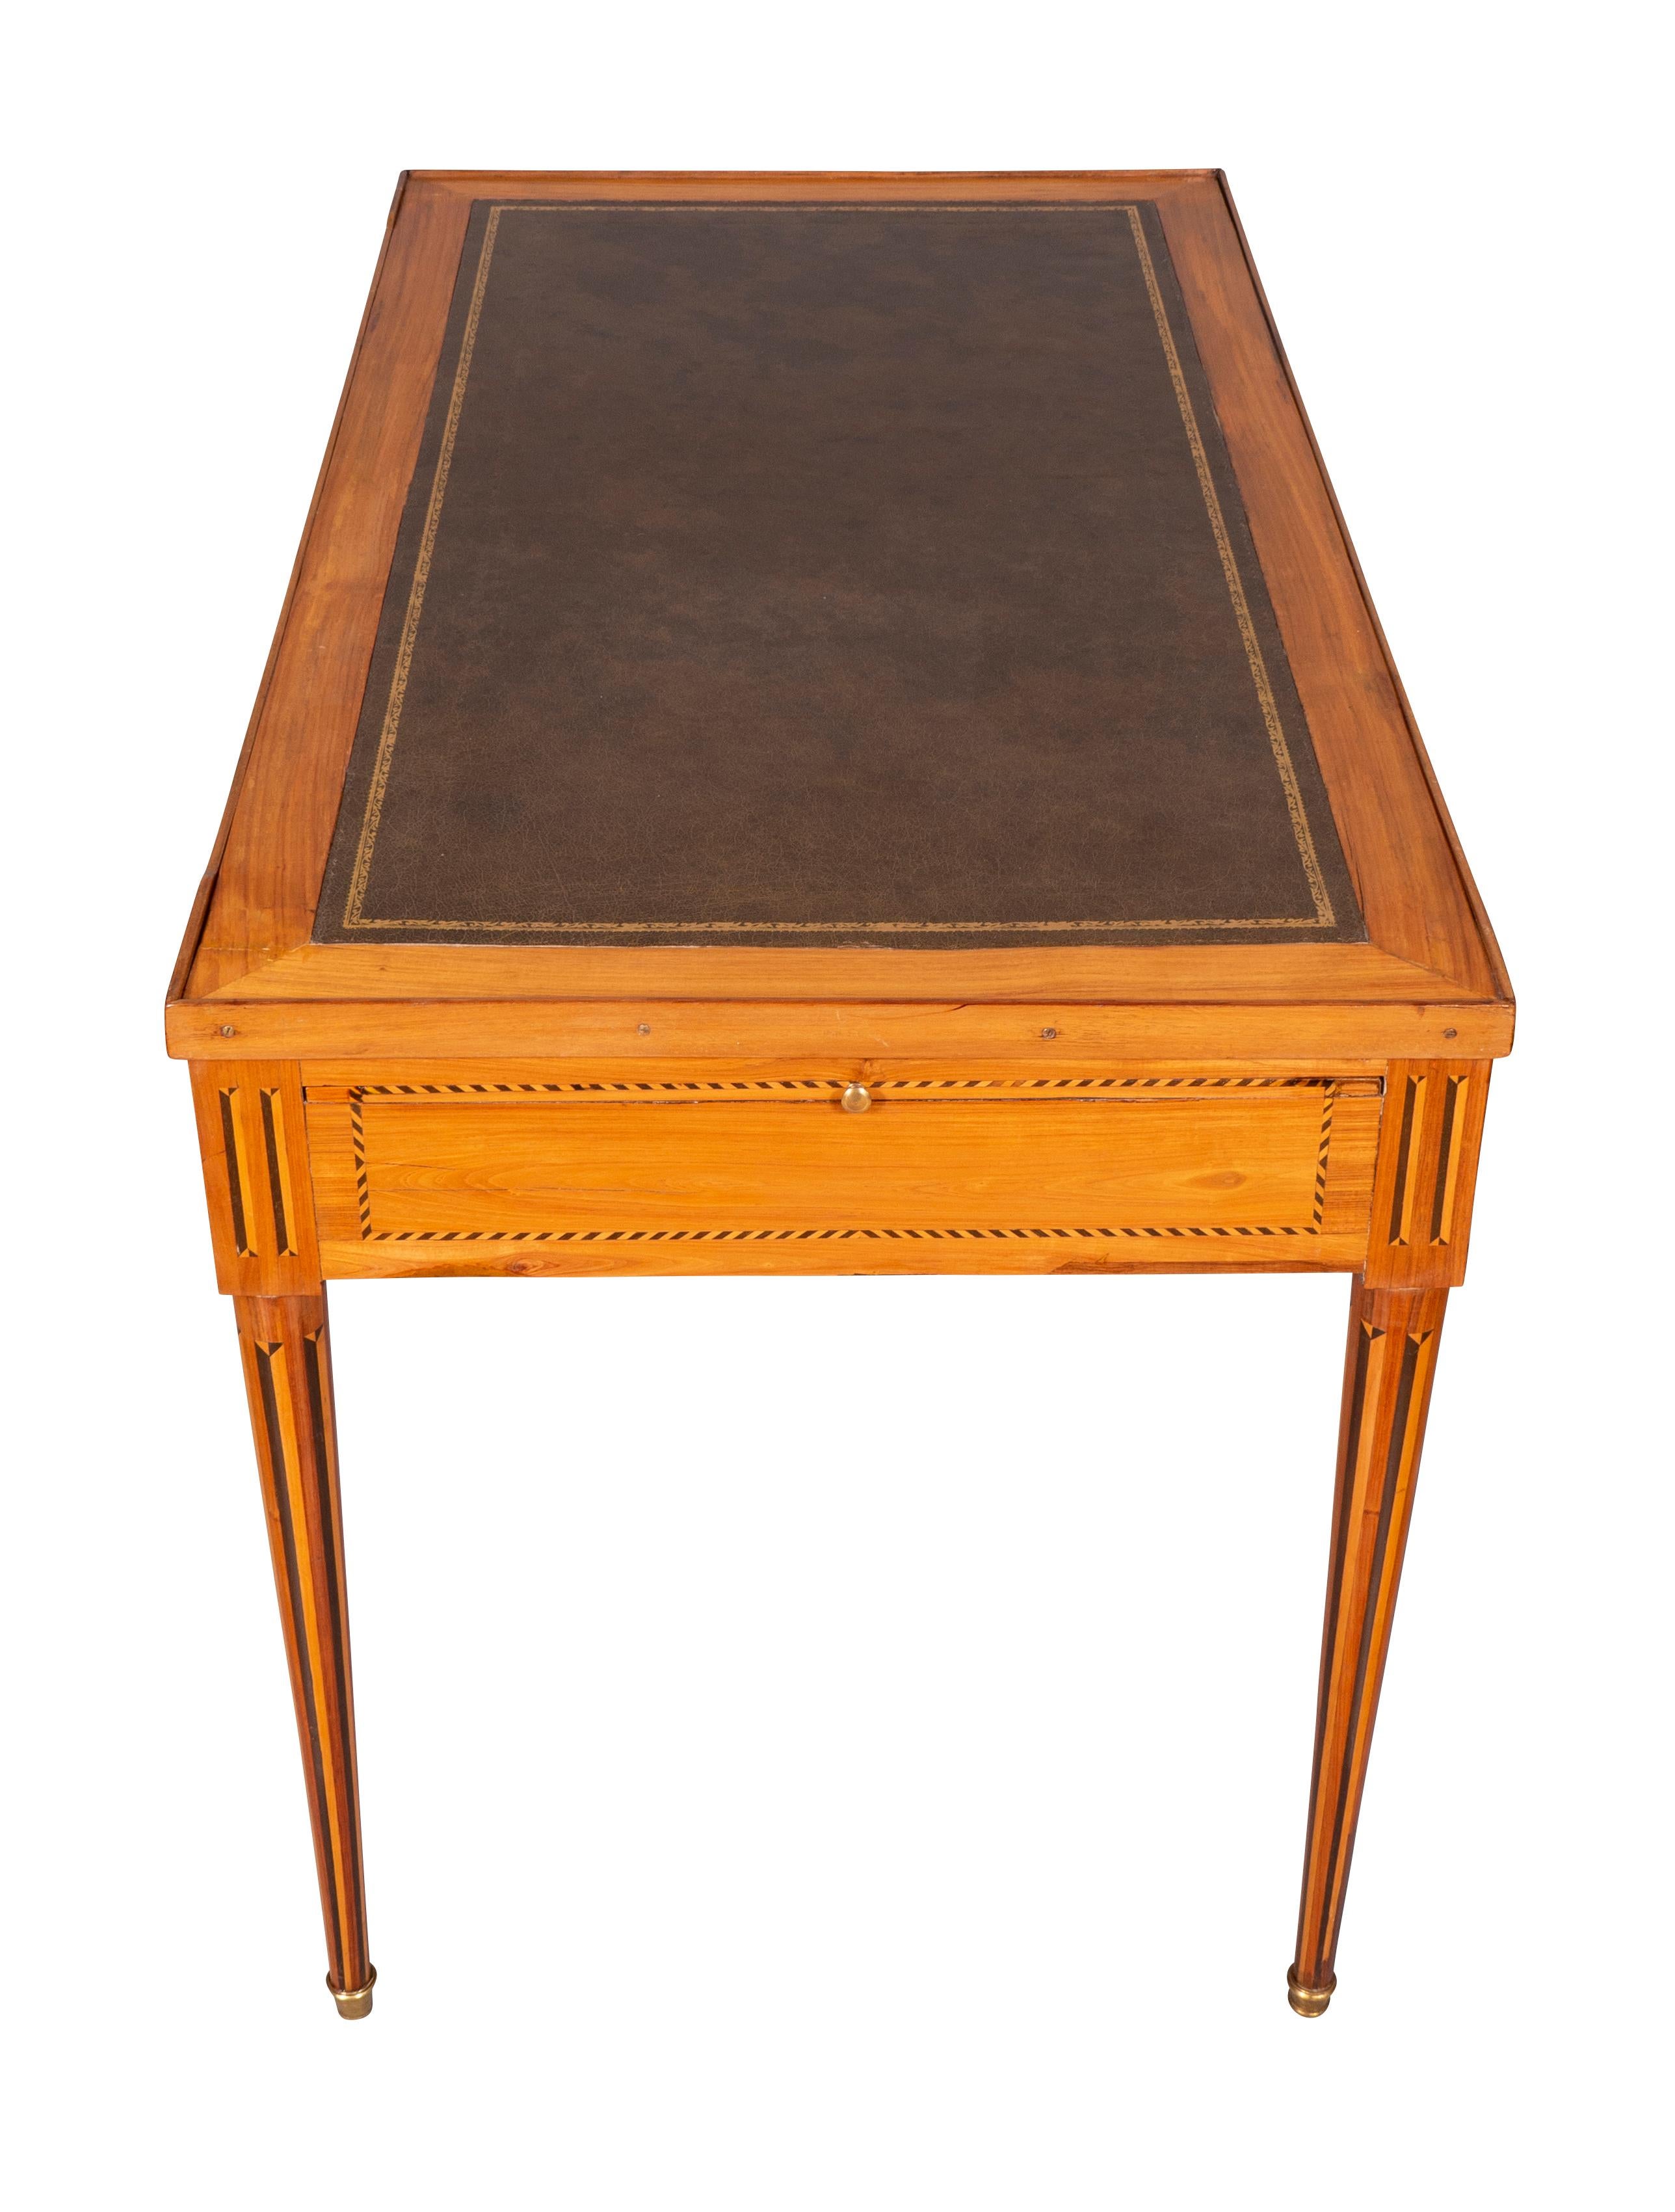 Leather Louis XVI Cherrywood Tric Trac Table For Sale